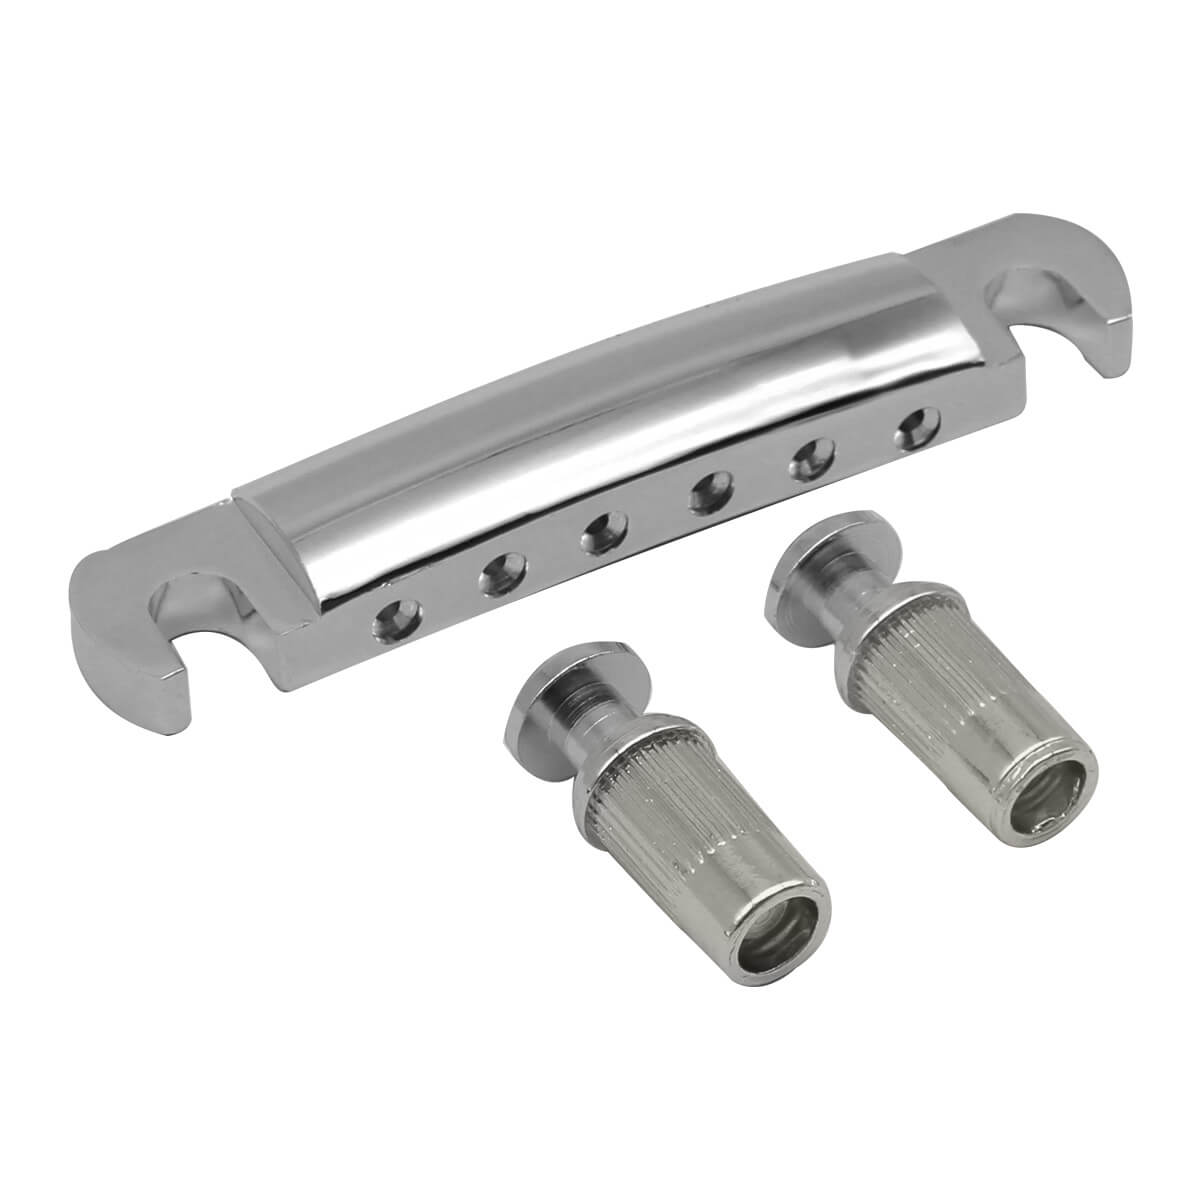 FLEOR Tune-O-Matic Guitar Tailpiece for LP Style Guitar | iknmusic